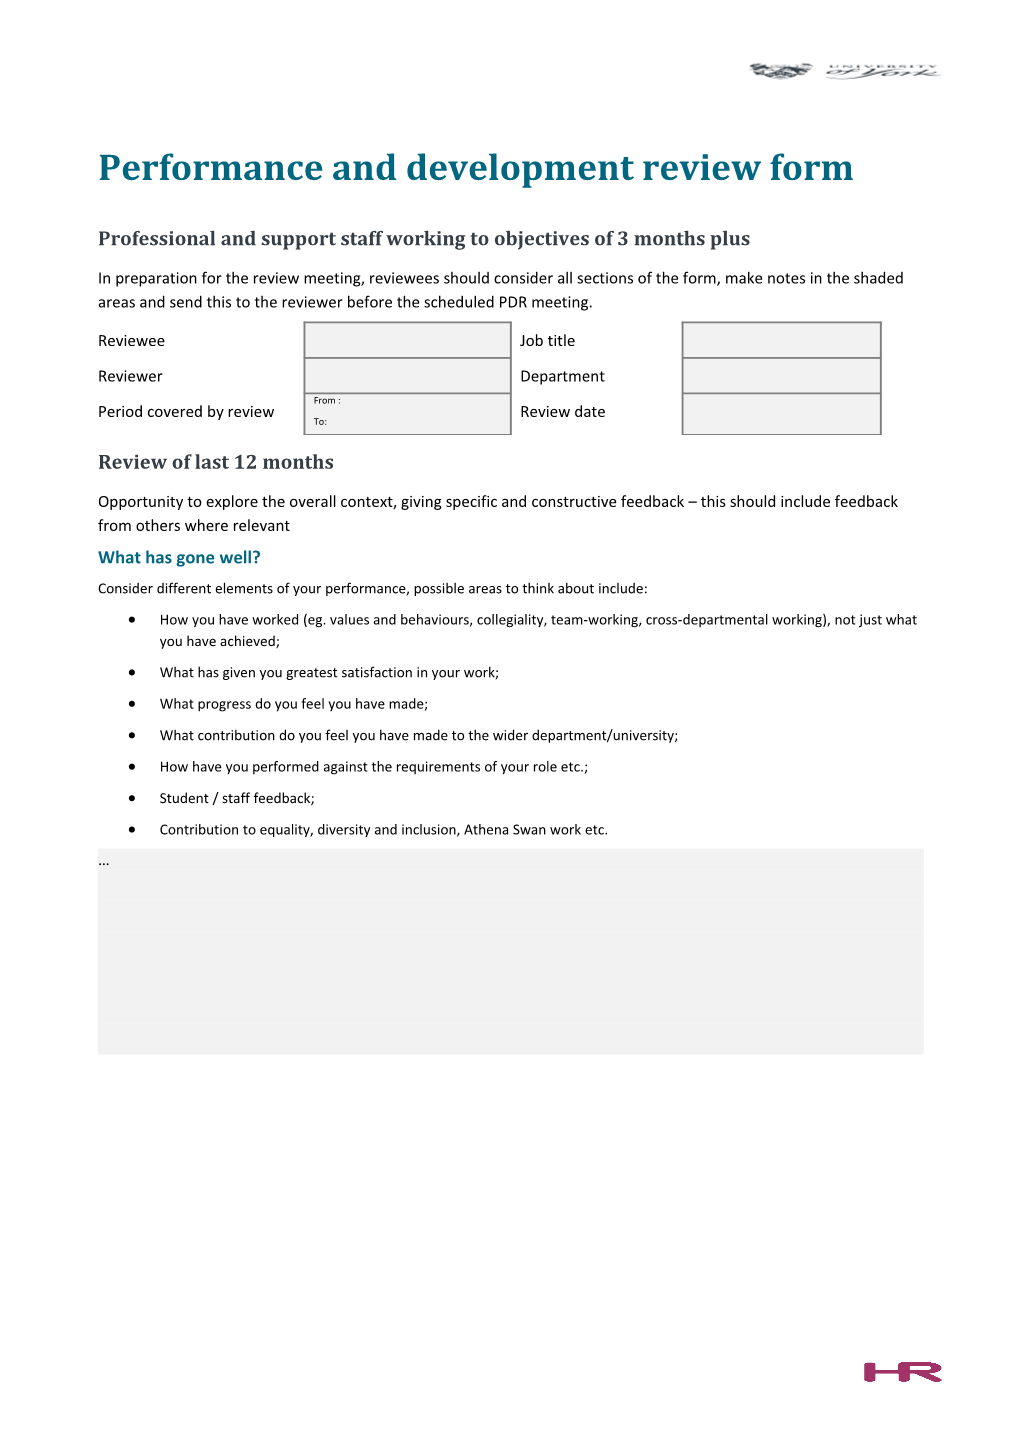 Performance Anddevelopment Review Form